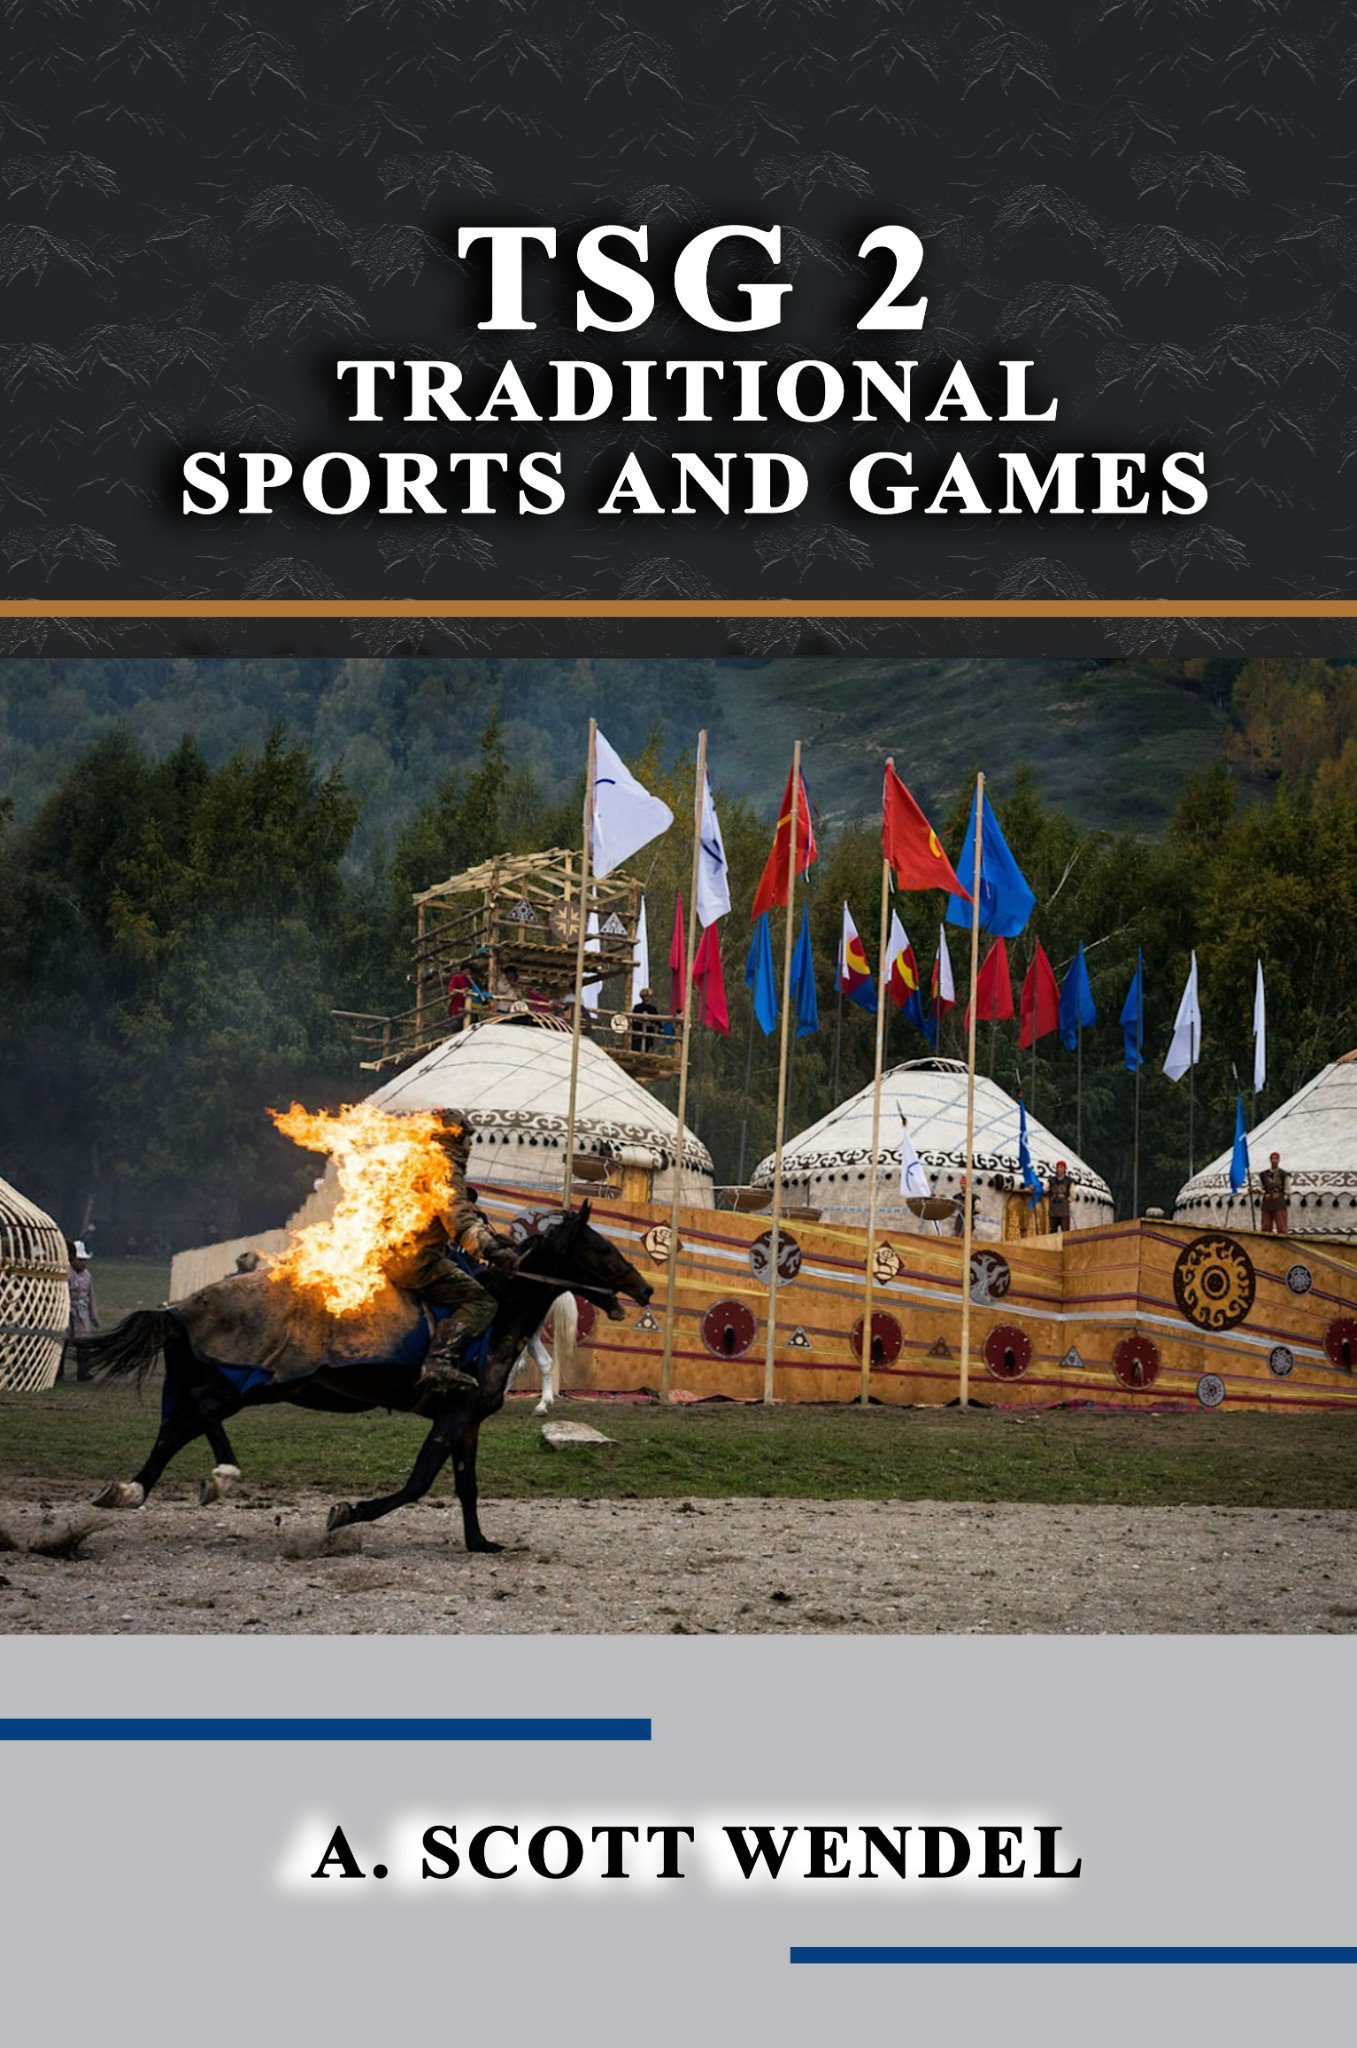 TSG 2 Traditional Sports and Games, A Scott Wendel